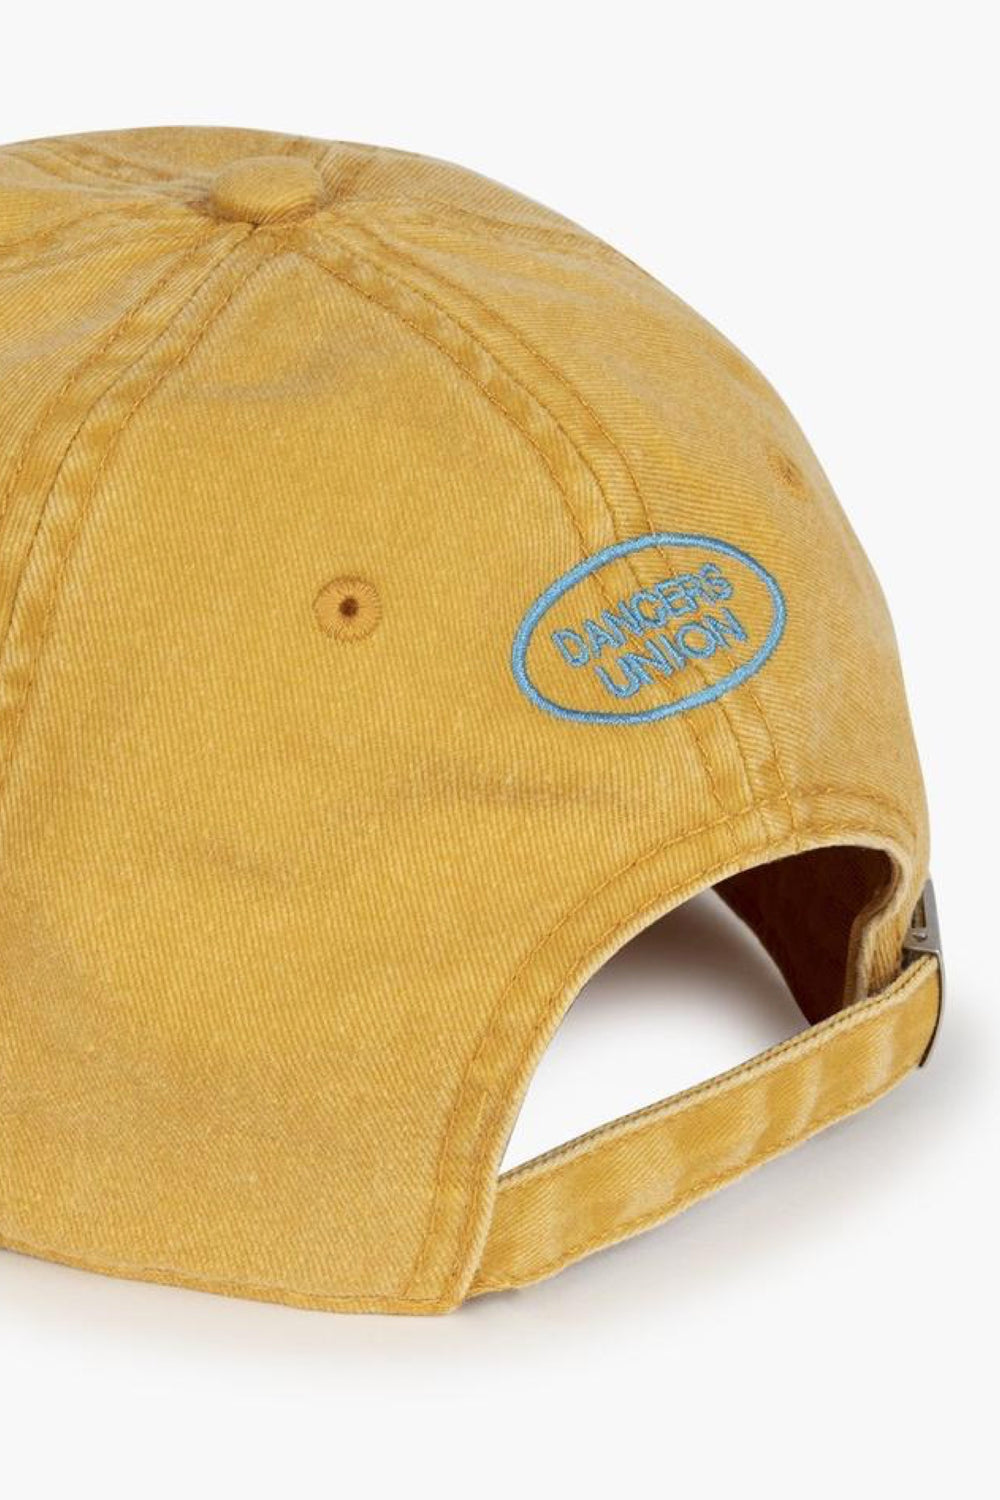 Sessions Happy Hour Hat